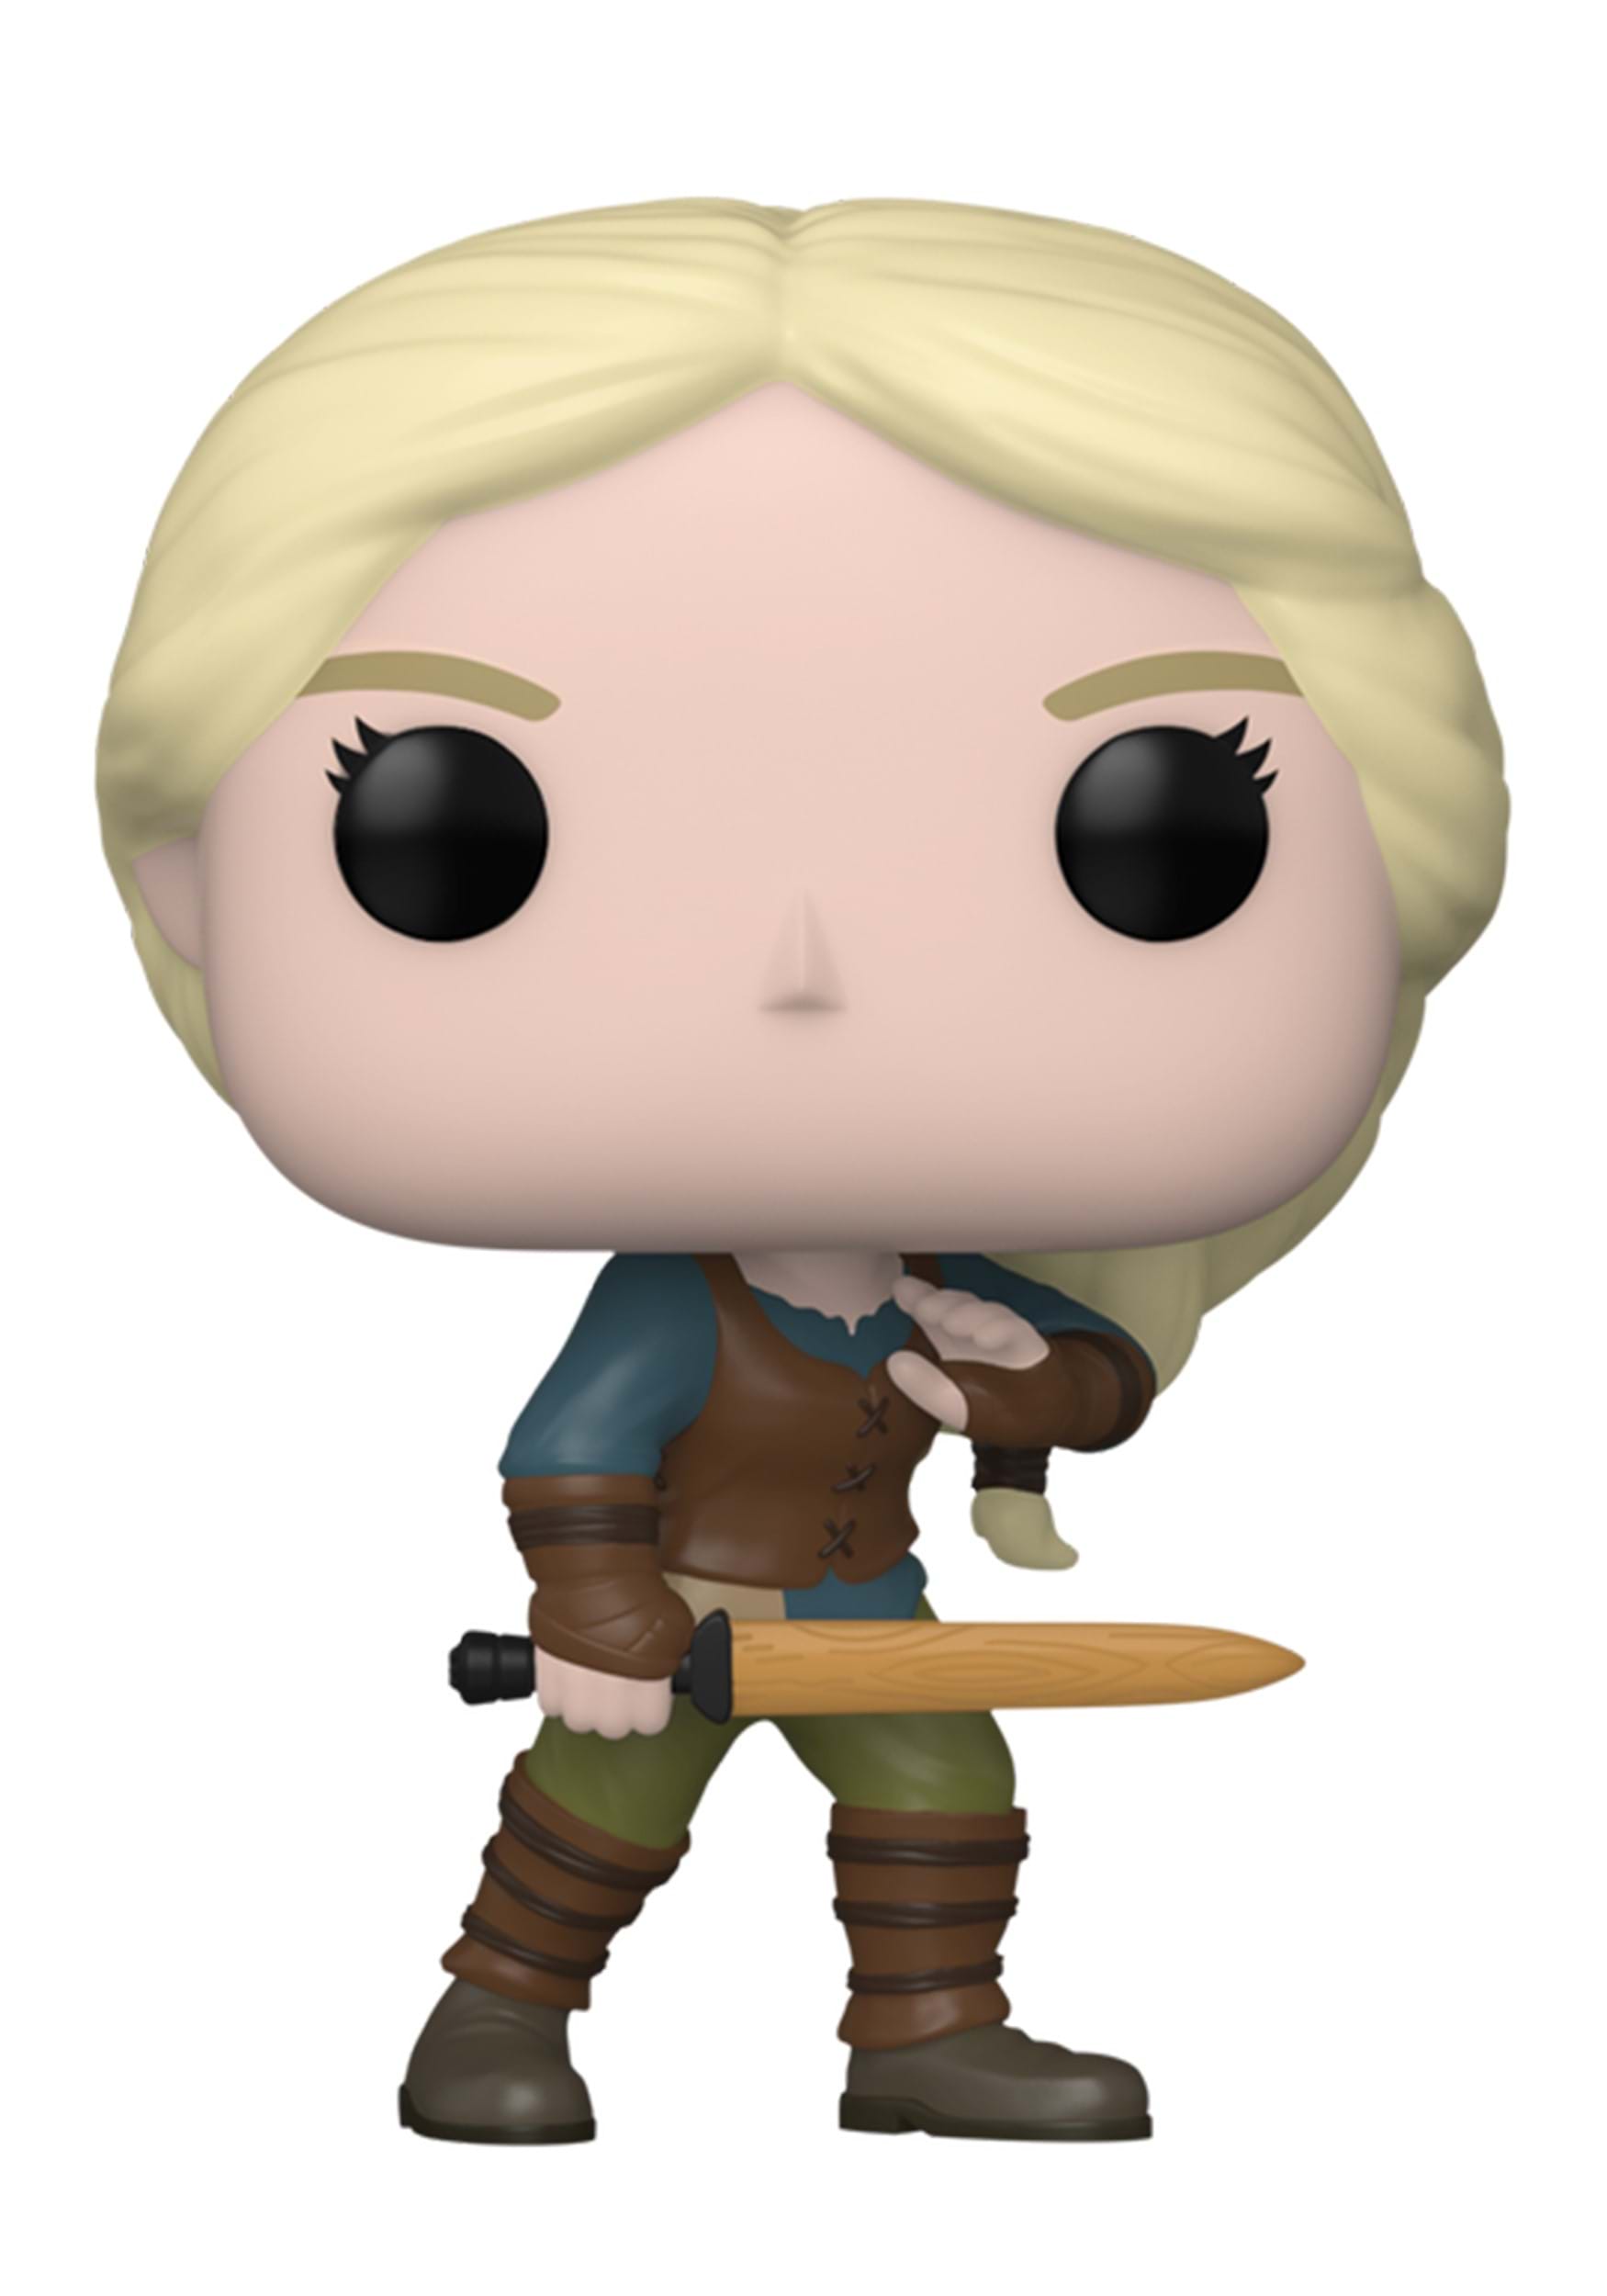 Funko POP! TV: Witcher Season 2 - Ciri with Sword | The Witcher Gifts